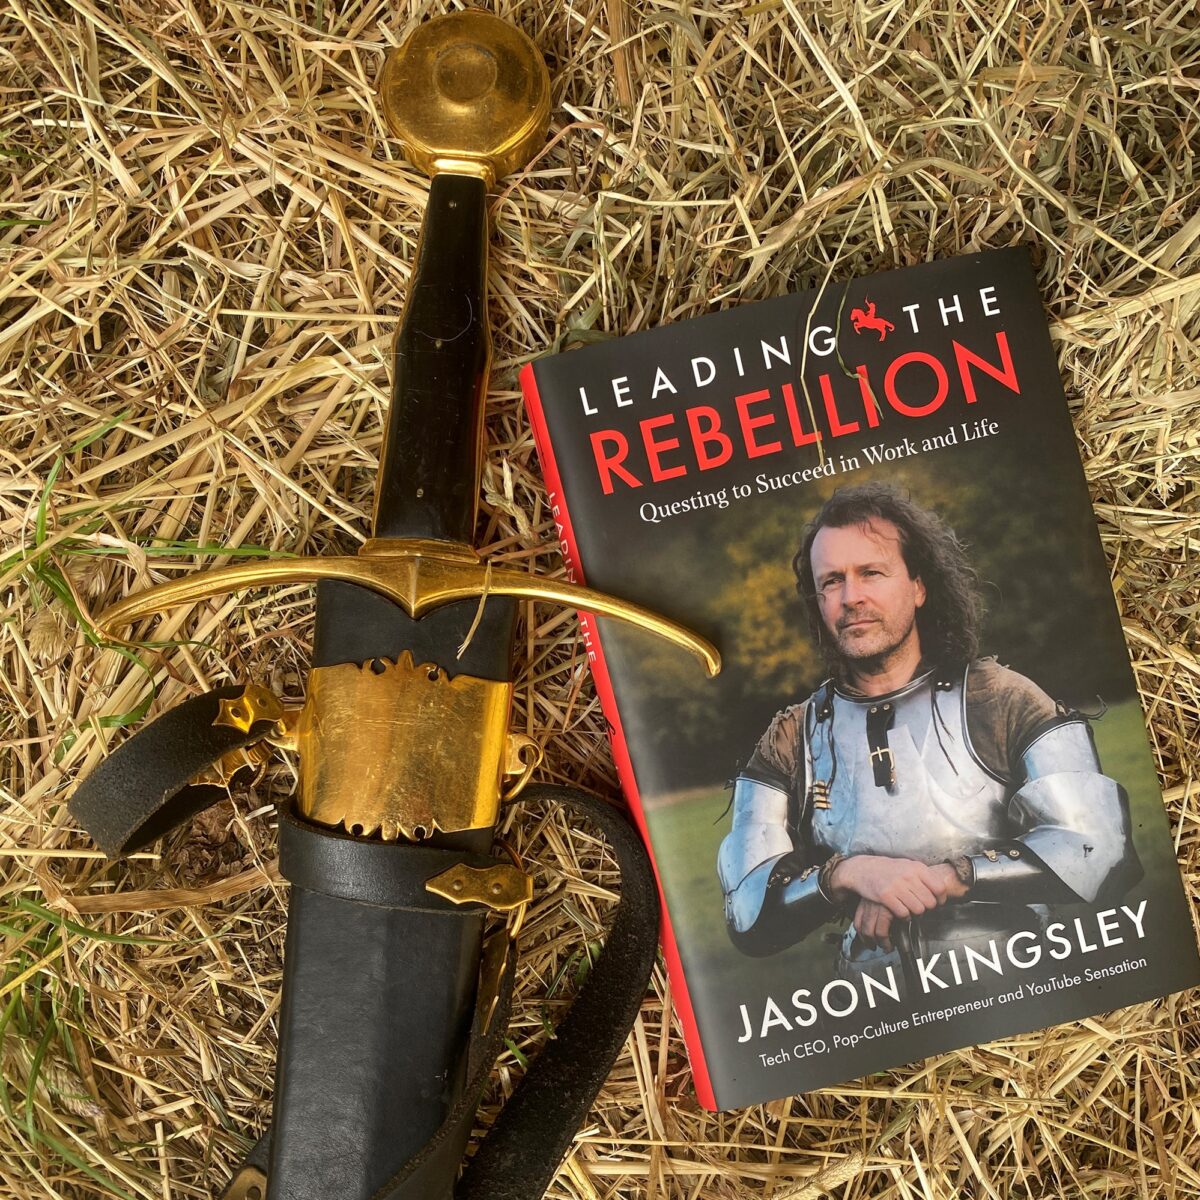 Rebellion CEO launches new book, Leading the Rebellion: Questing to Succeed in Work and Life